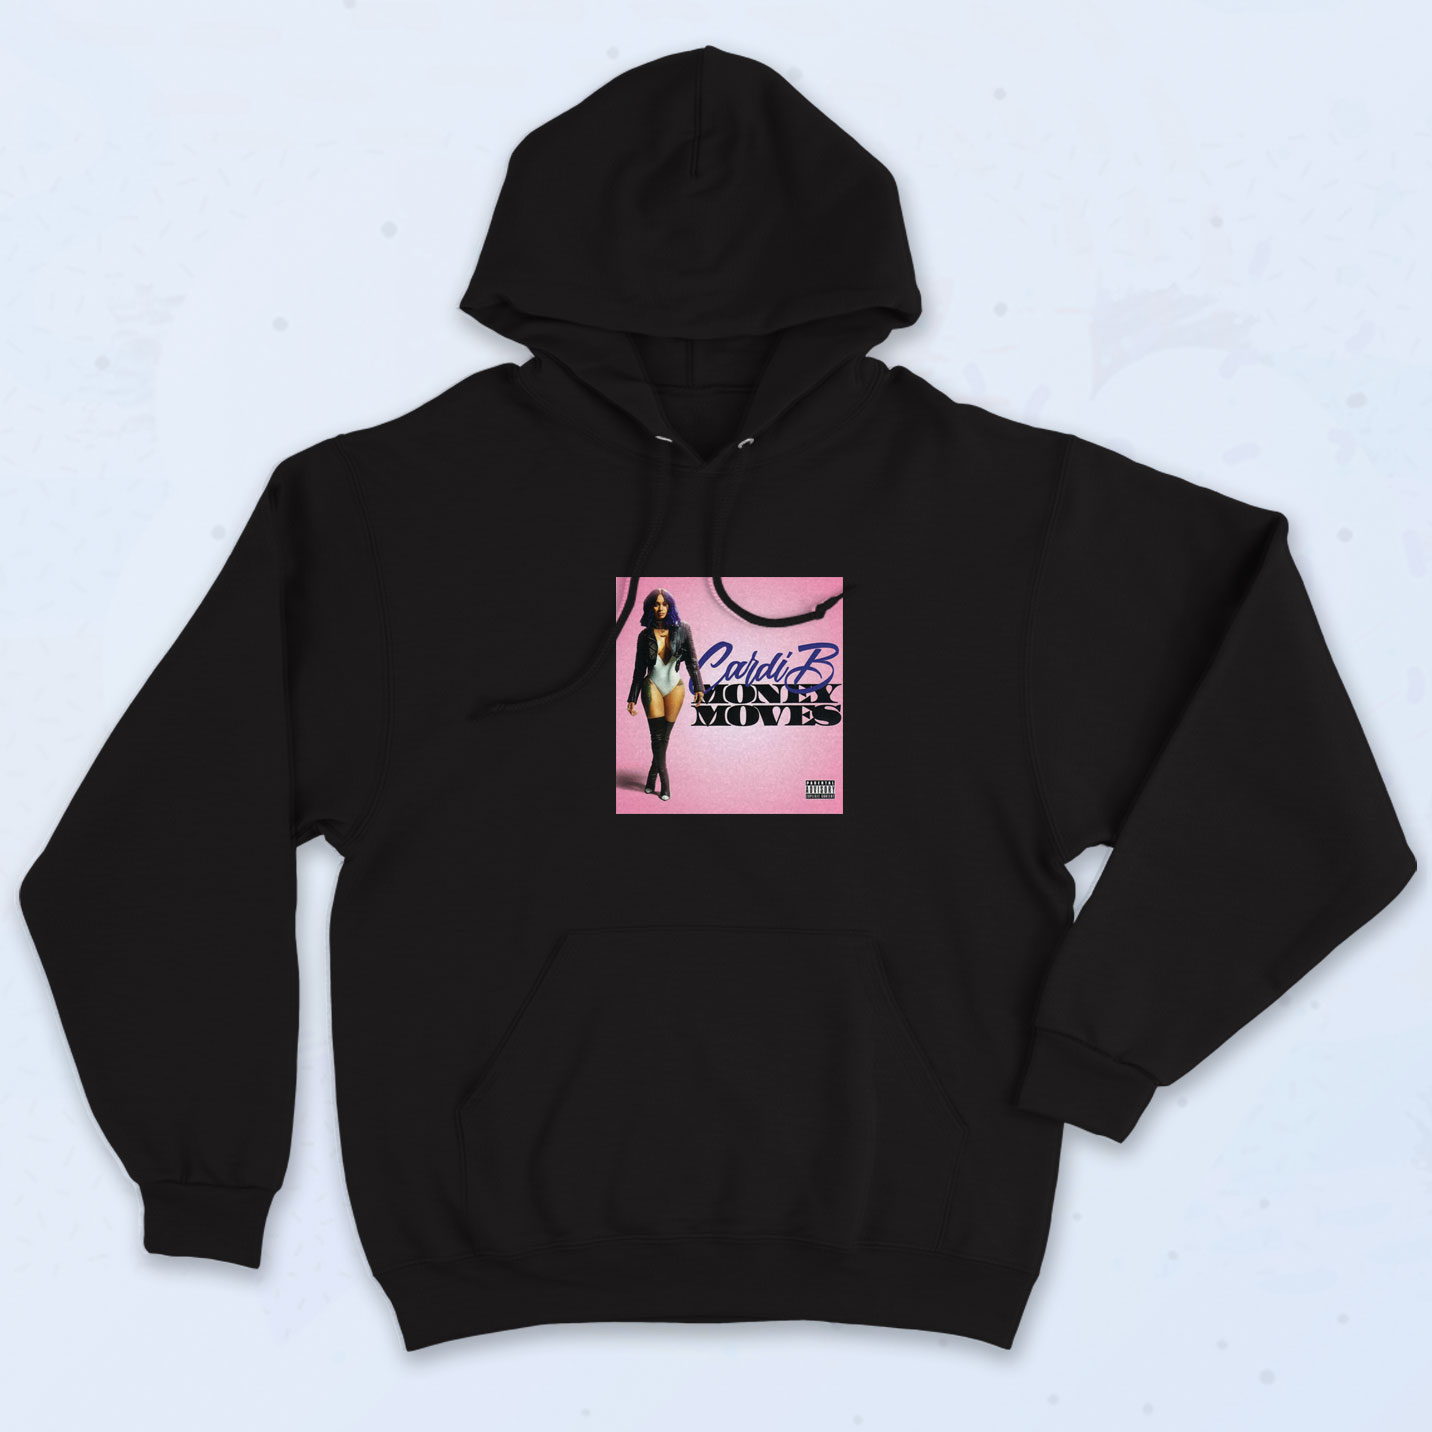 Cardi B Money Moves Hoodie On Sale - 90sclothes.com